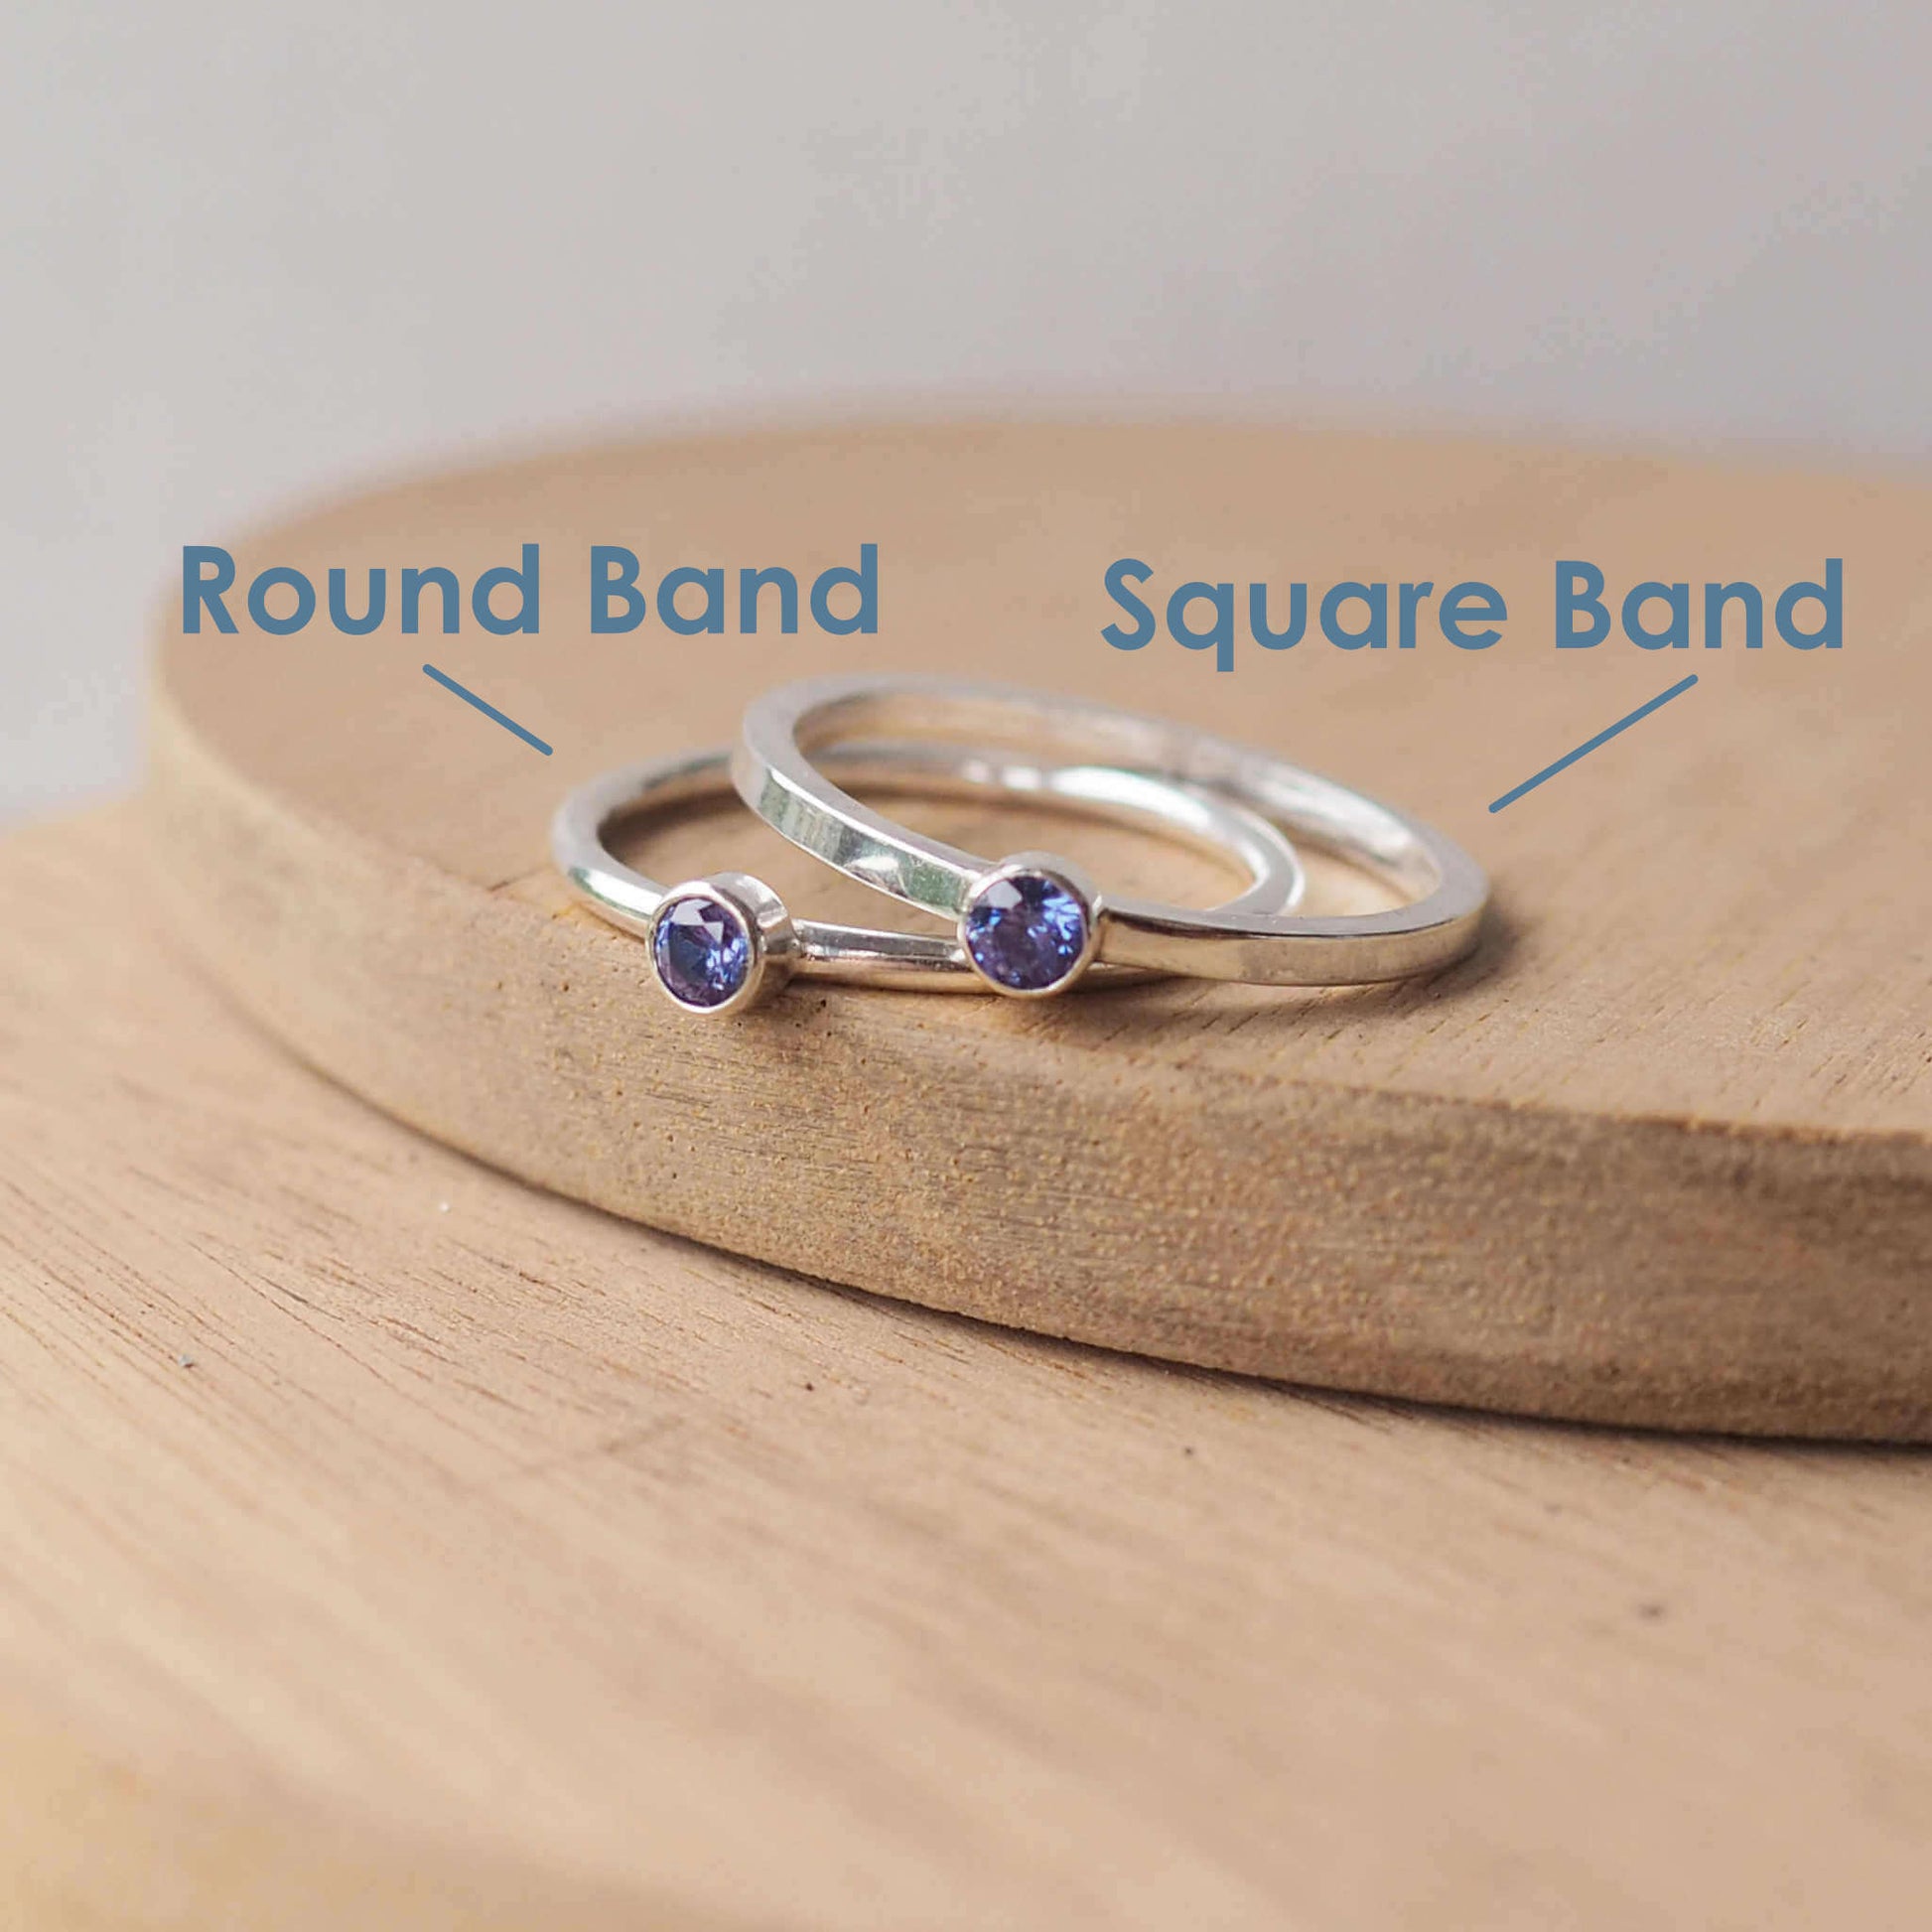 Two rings showing the square and round band styles with 3mm tanzanite cubic zirconia gemstones. The rings are made from Sterling Silver and a round violet cubic zirconia measuring 3mm in size. Handmade by maram jewellery in Scotland